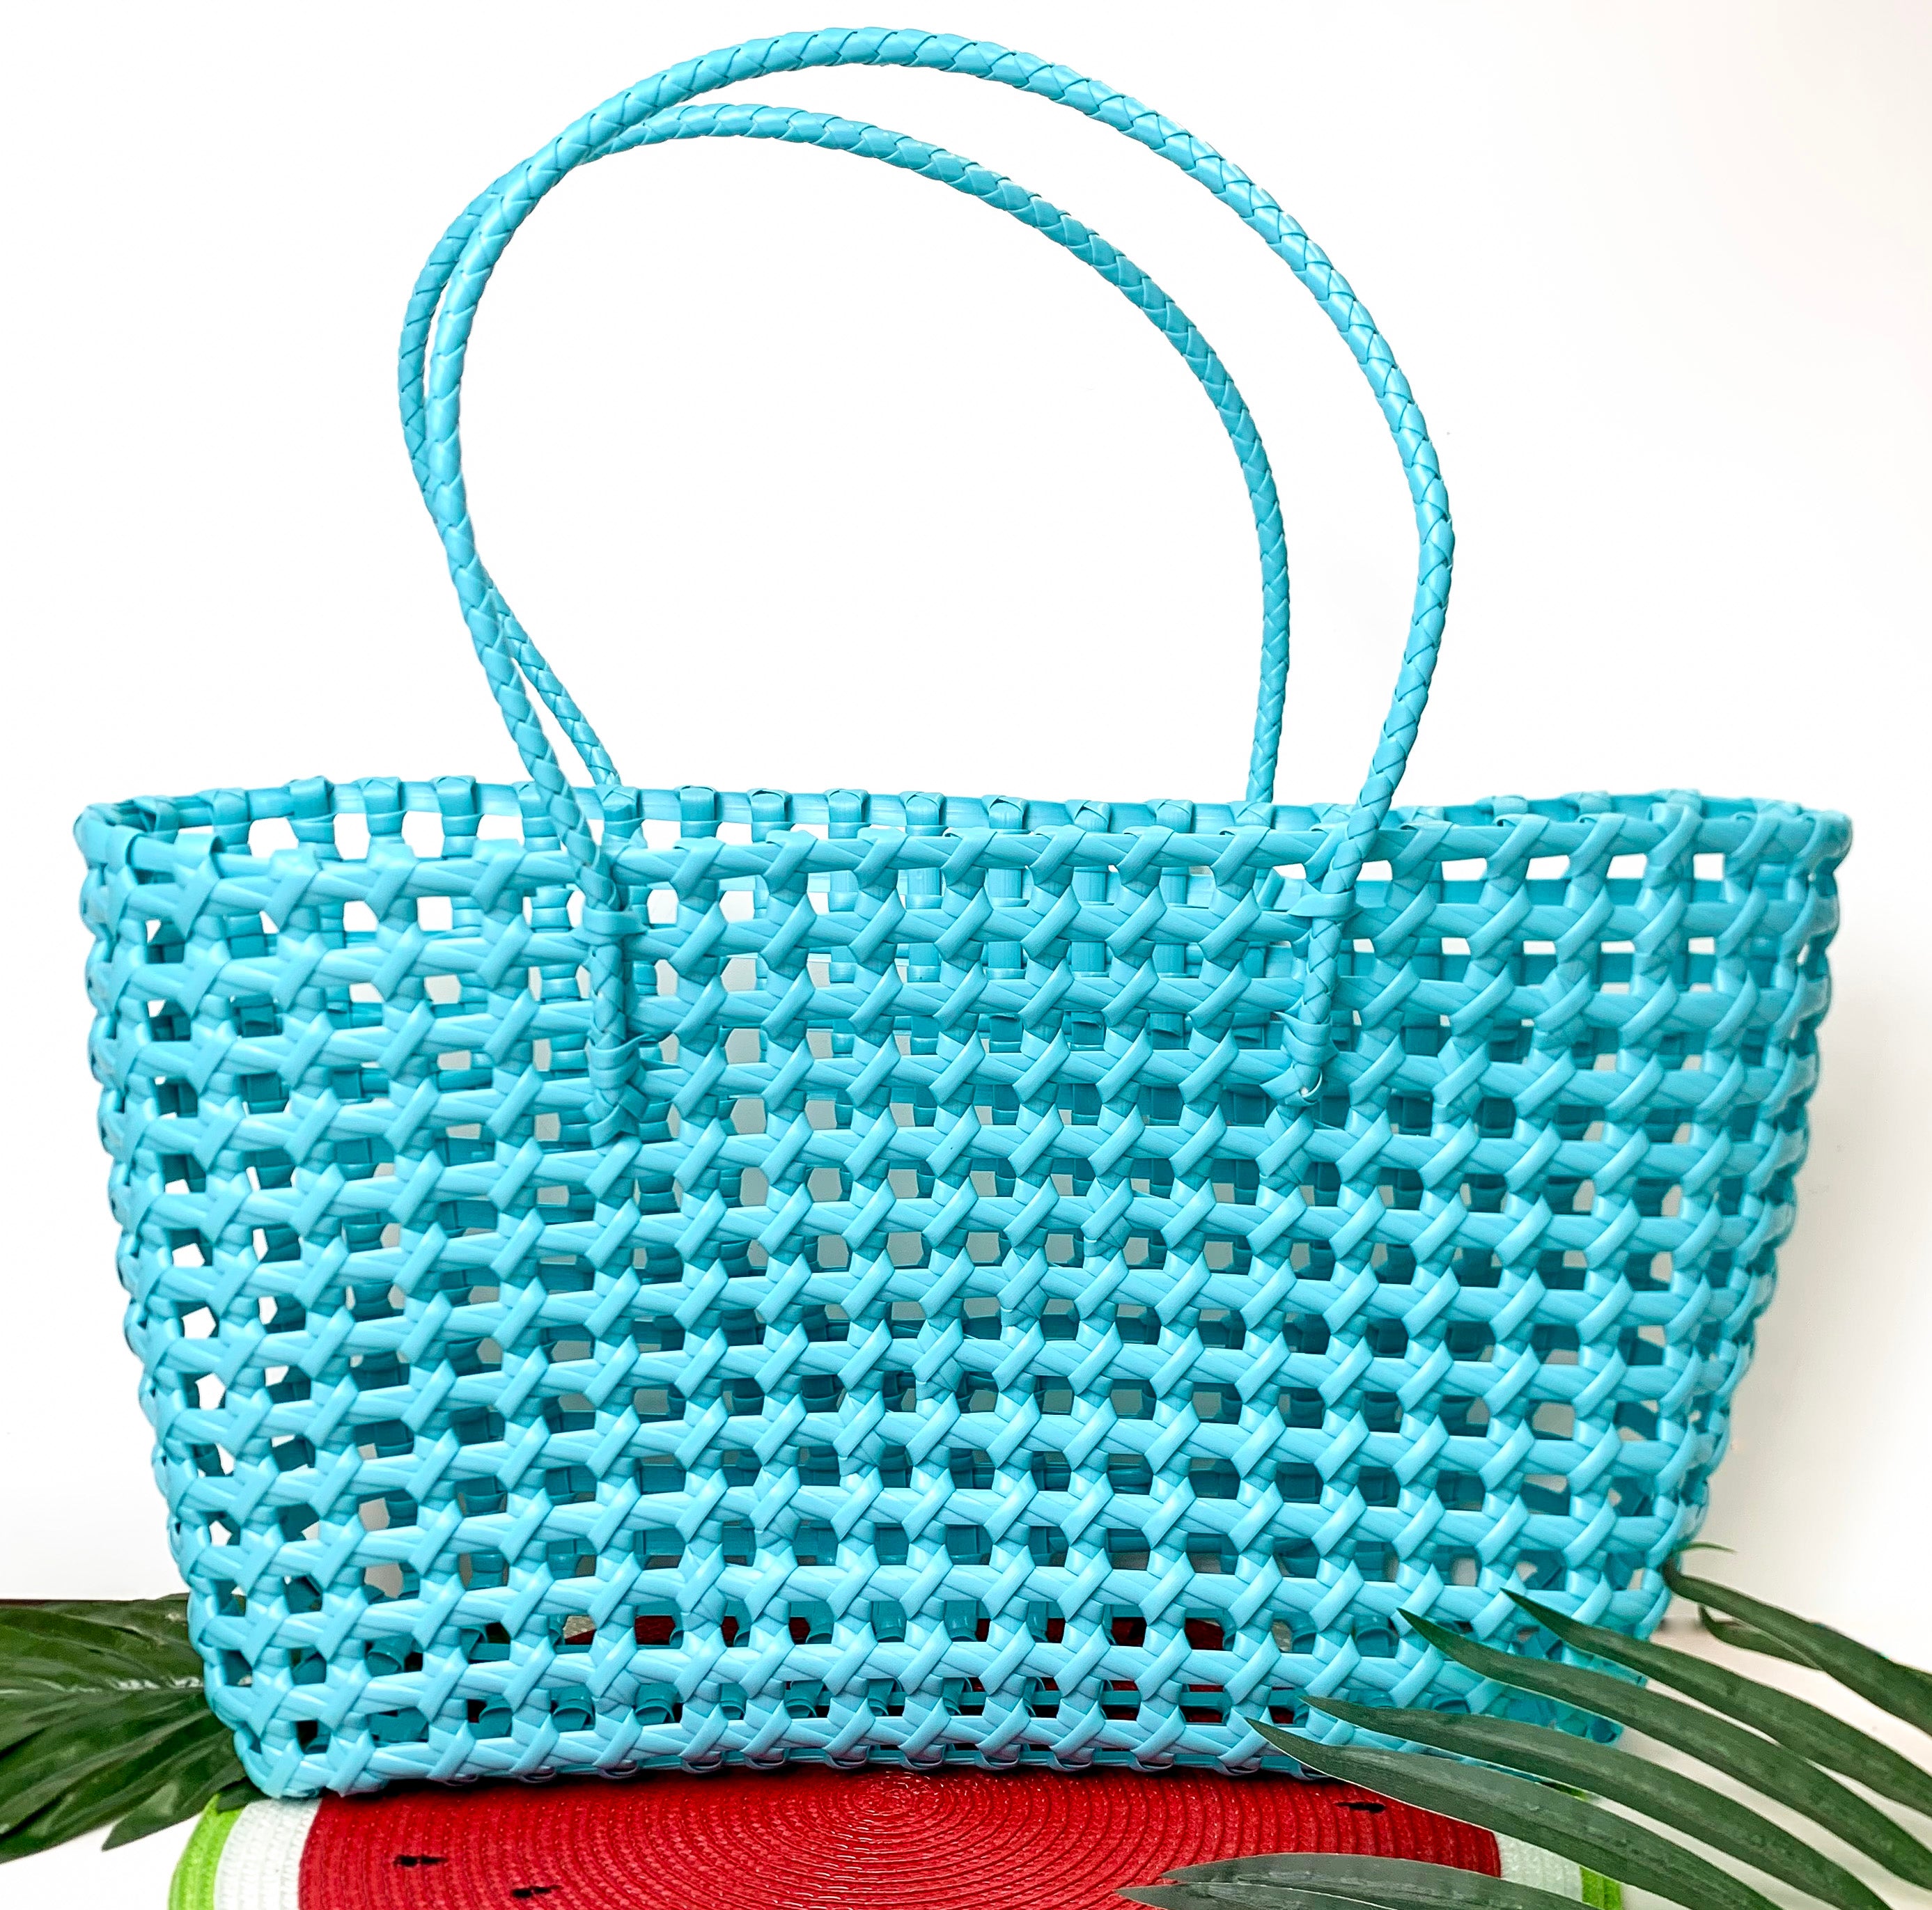 Beachy Brights Basket Tote Bag in Turquoise Blue - Giddy Up Glamour Boutique